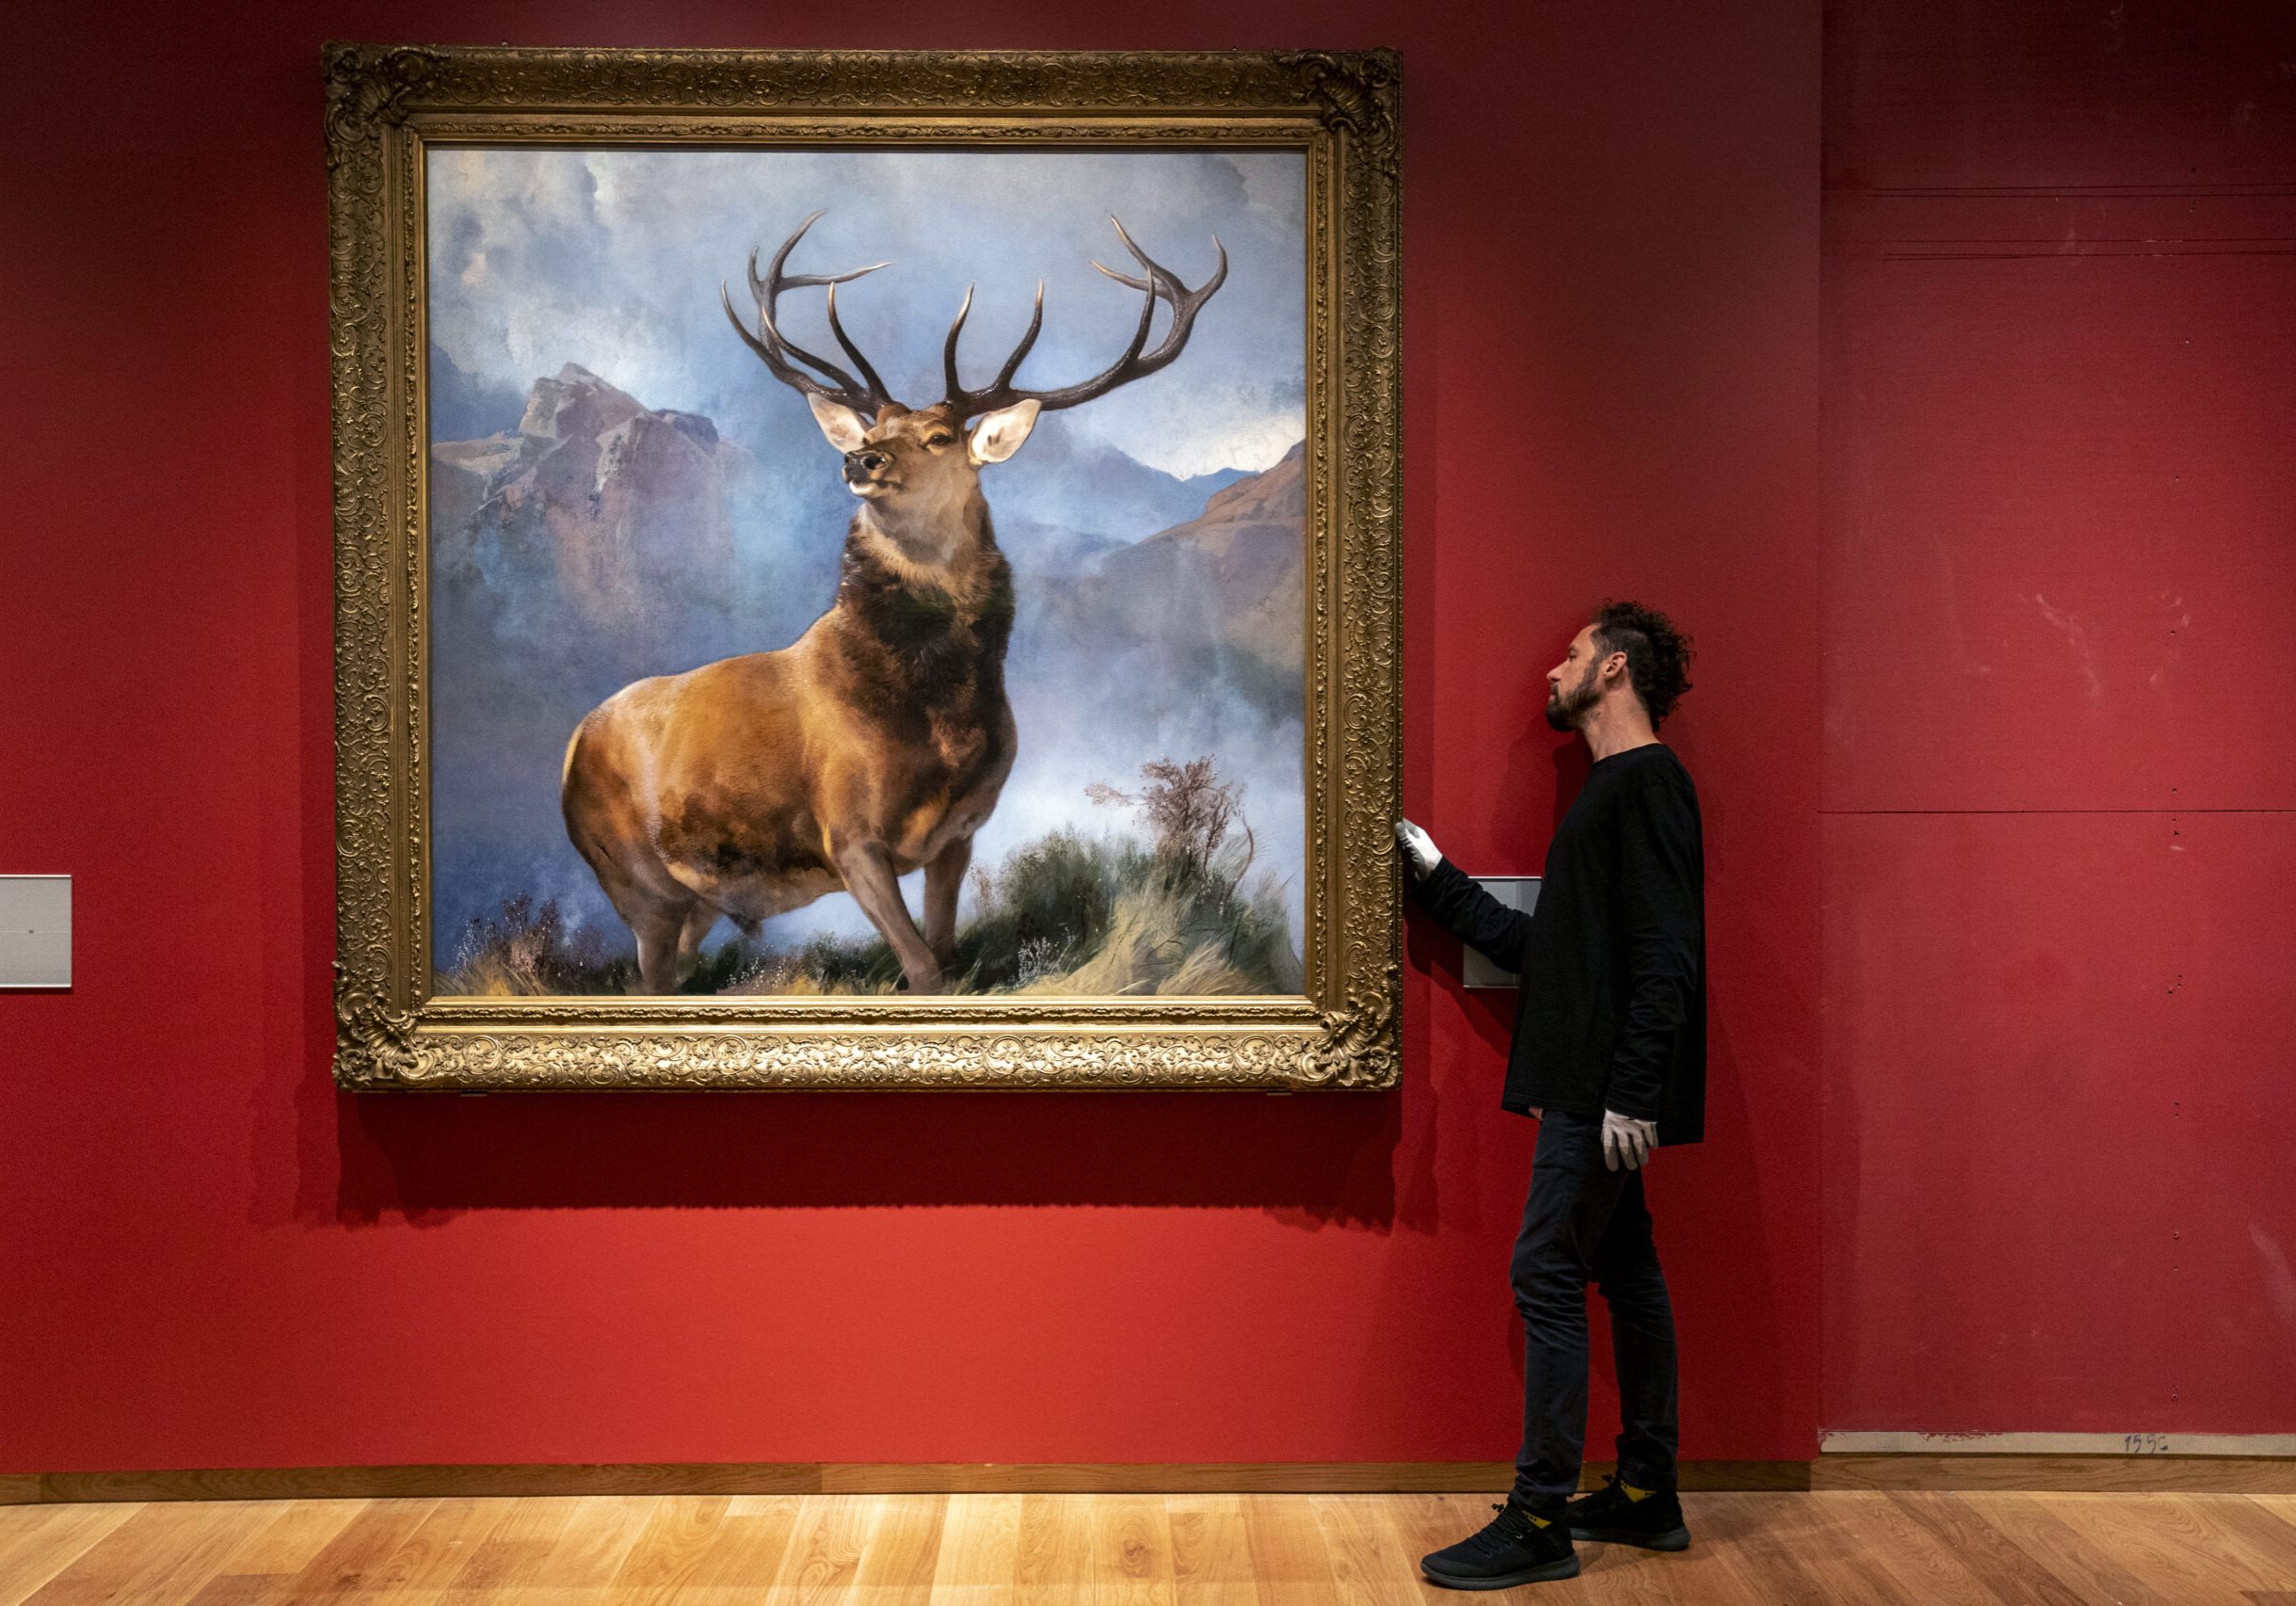 Monarch-of-the-Glen-moves-to-its-new-home-in-the-new-Scottish-galleries-at-the-National.-Credit-Jane-Barlow-7-15ht28m0s-scaled